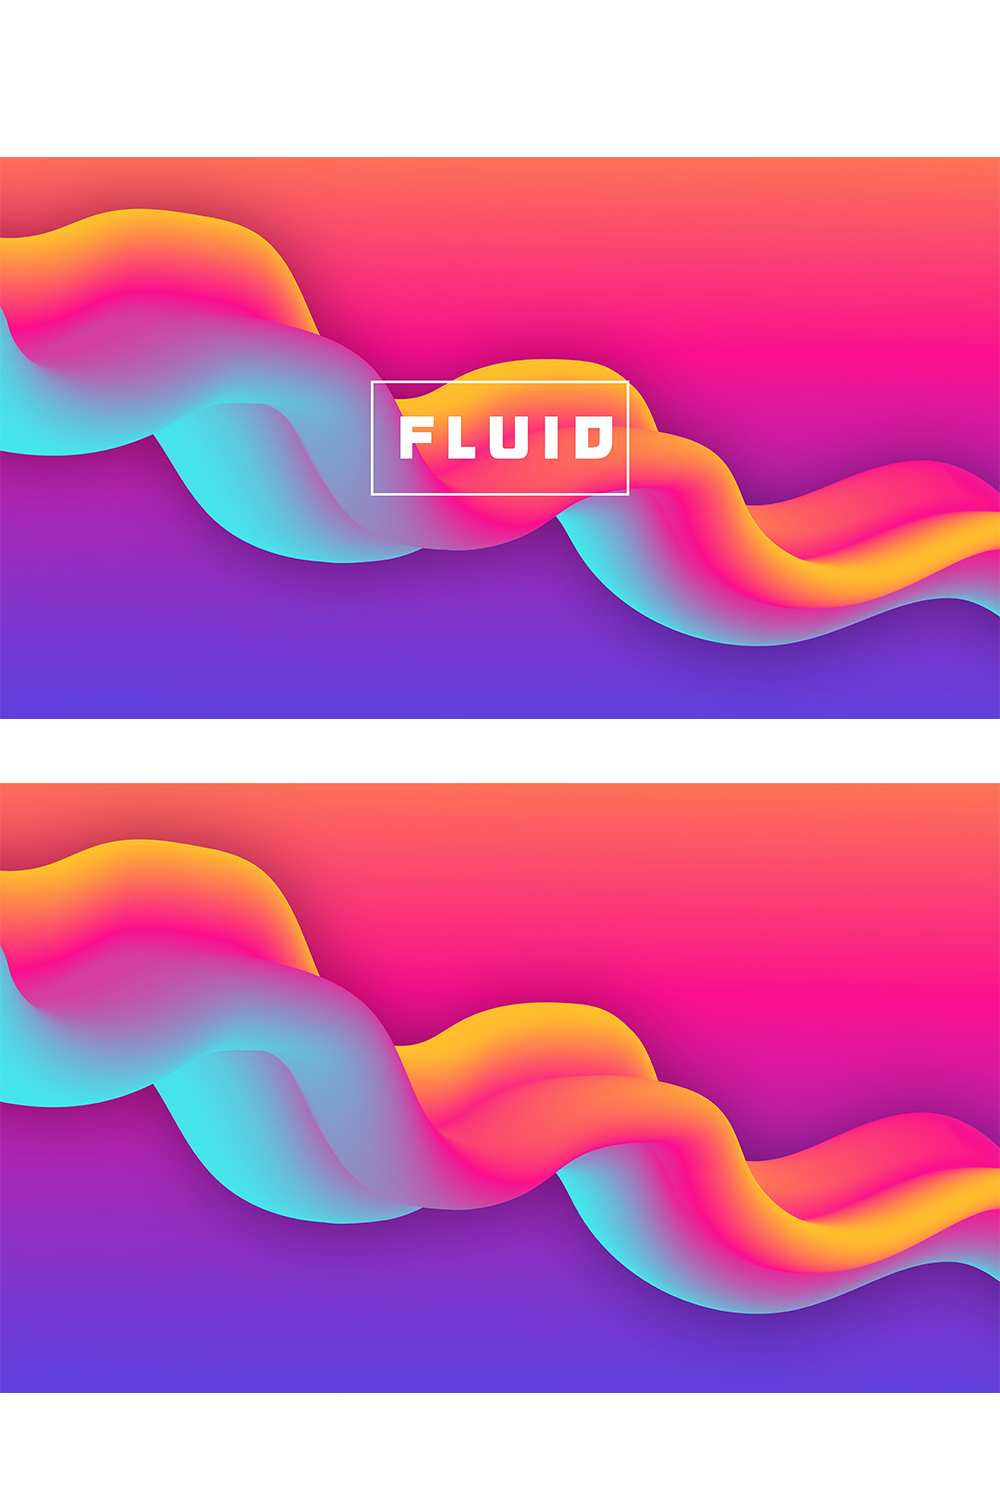 Modern Technology Fluid Background Design With Colorful Gradient pinterest preview image.